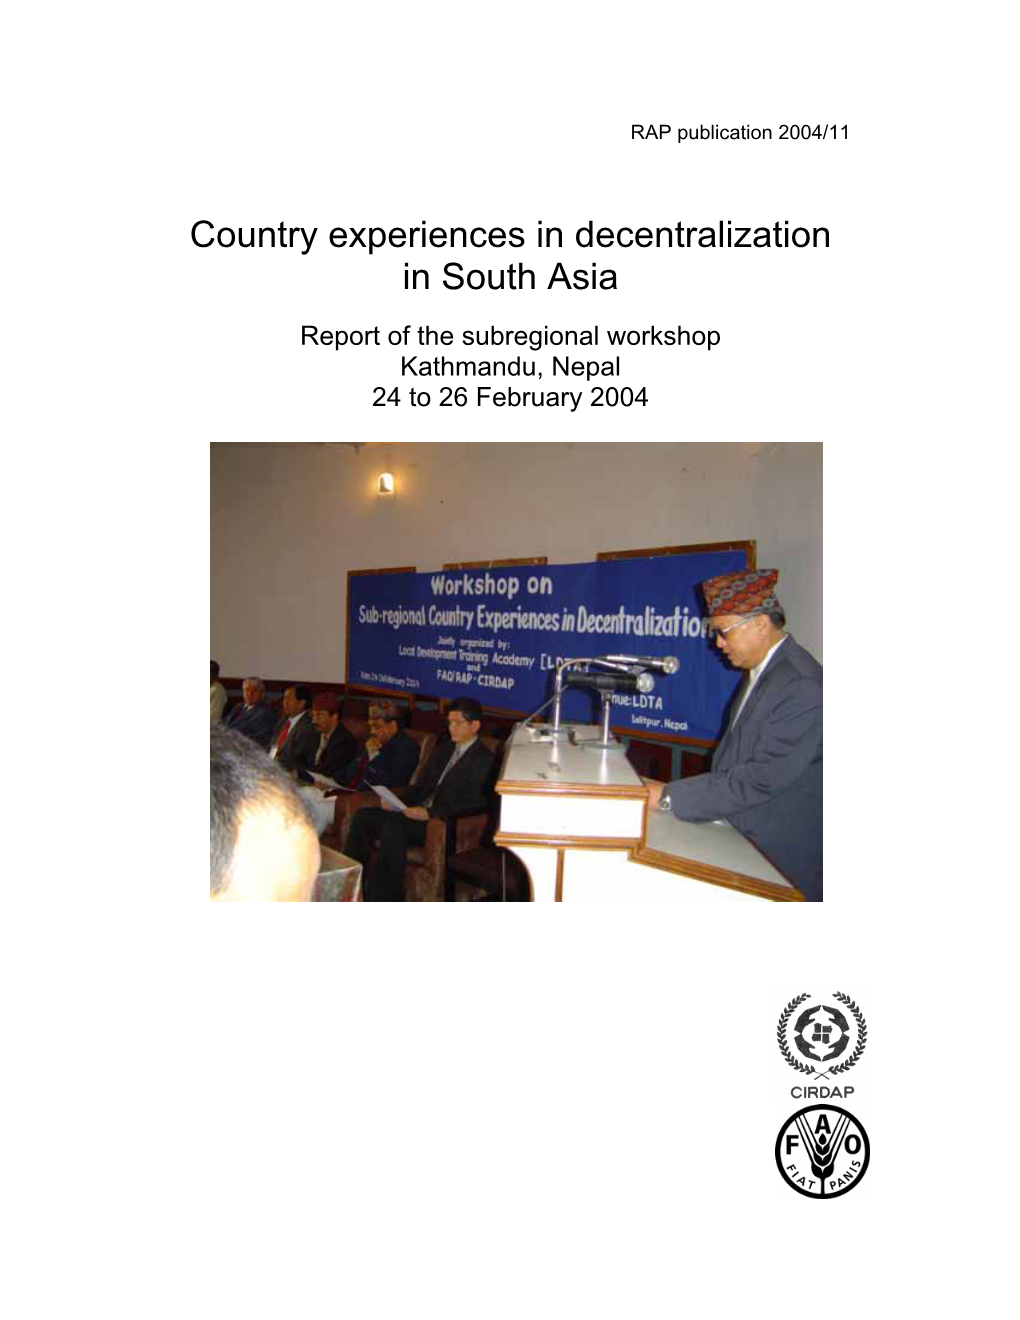 Country Experiences in Decentralization in South Asia